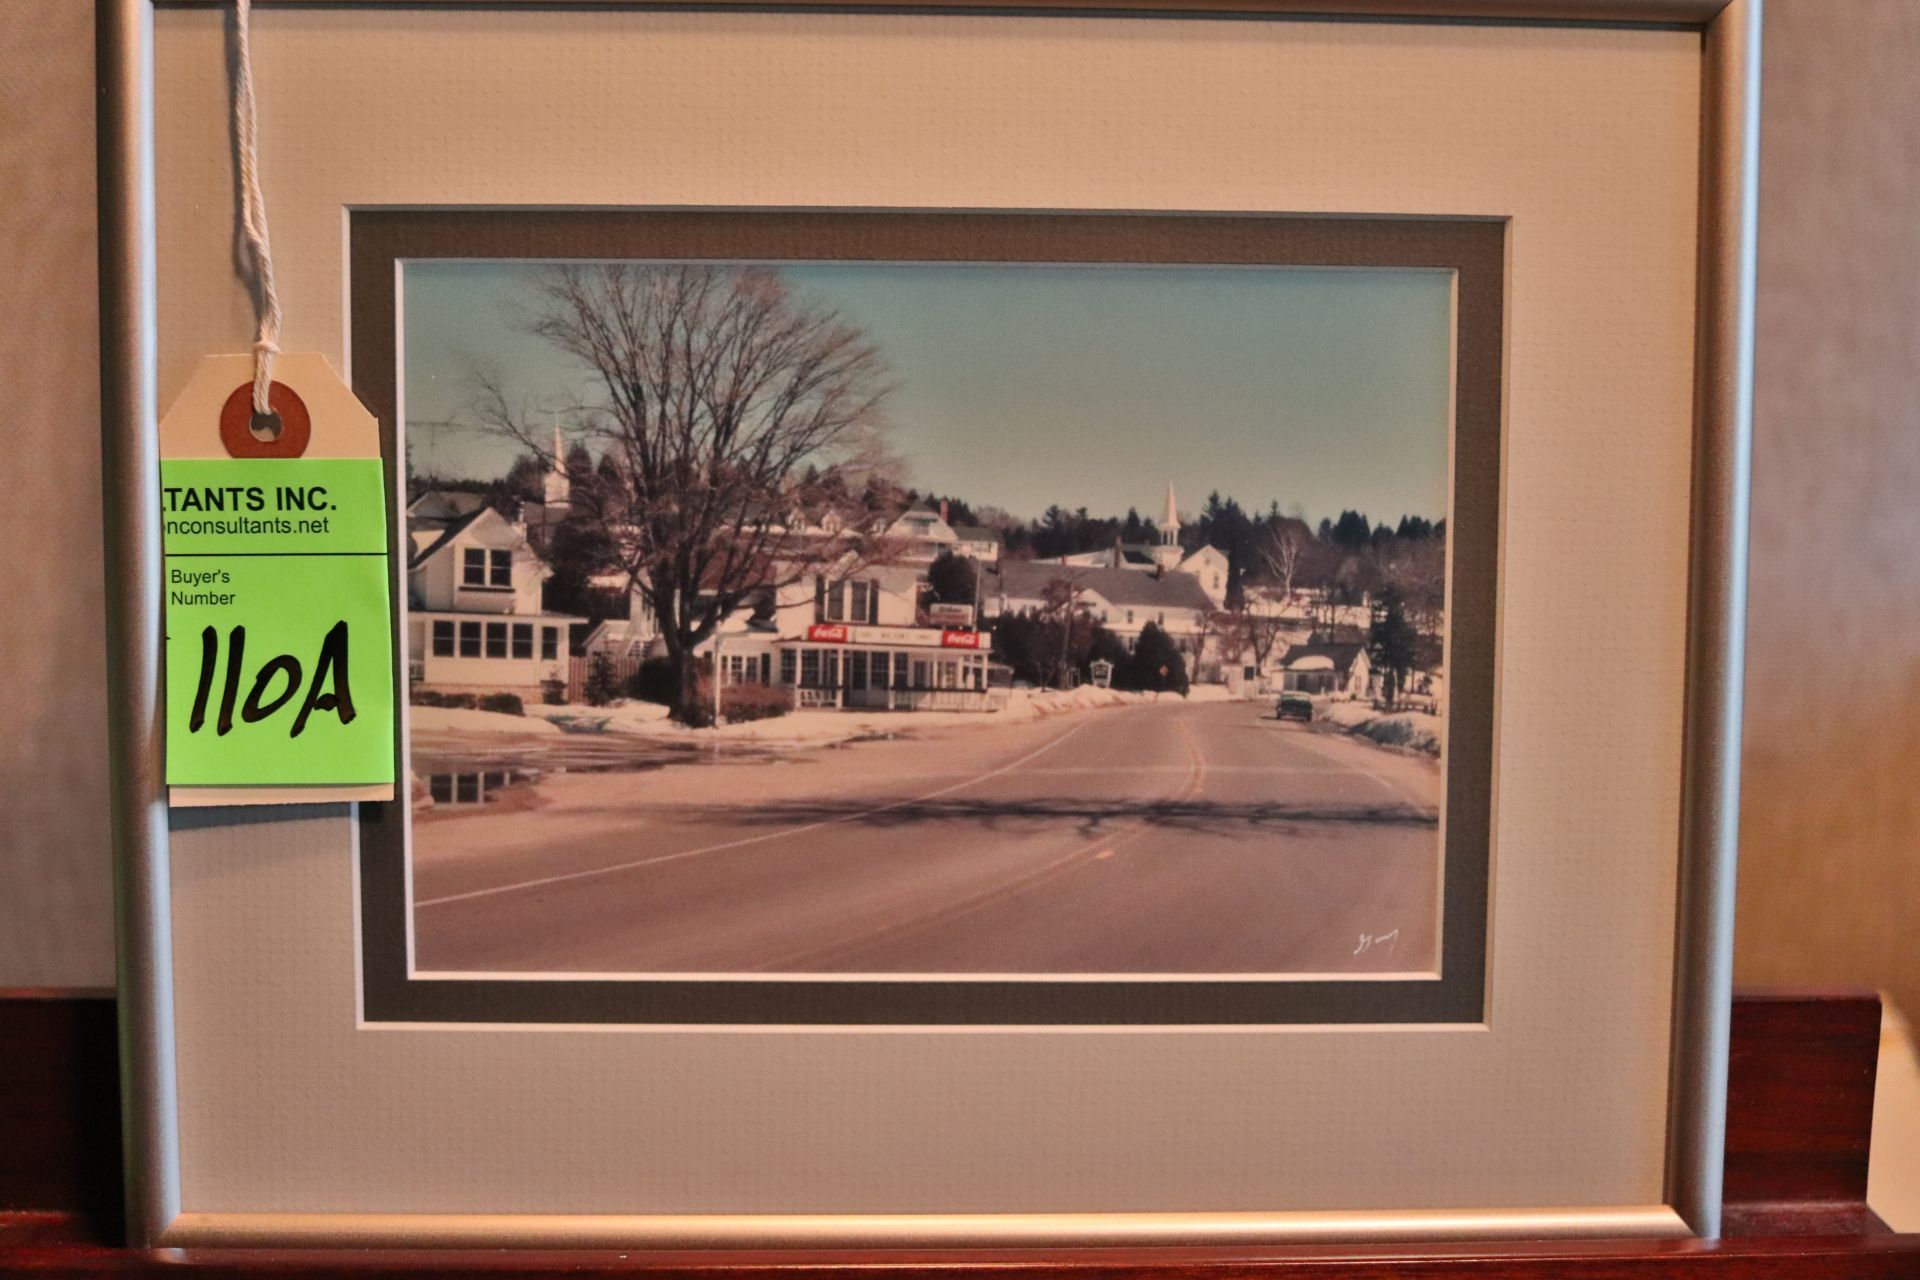 Framed photograph, signed by artist, depicting 1950 small town road, approximate size 8" x 10"